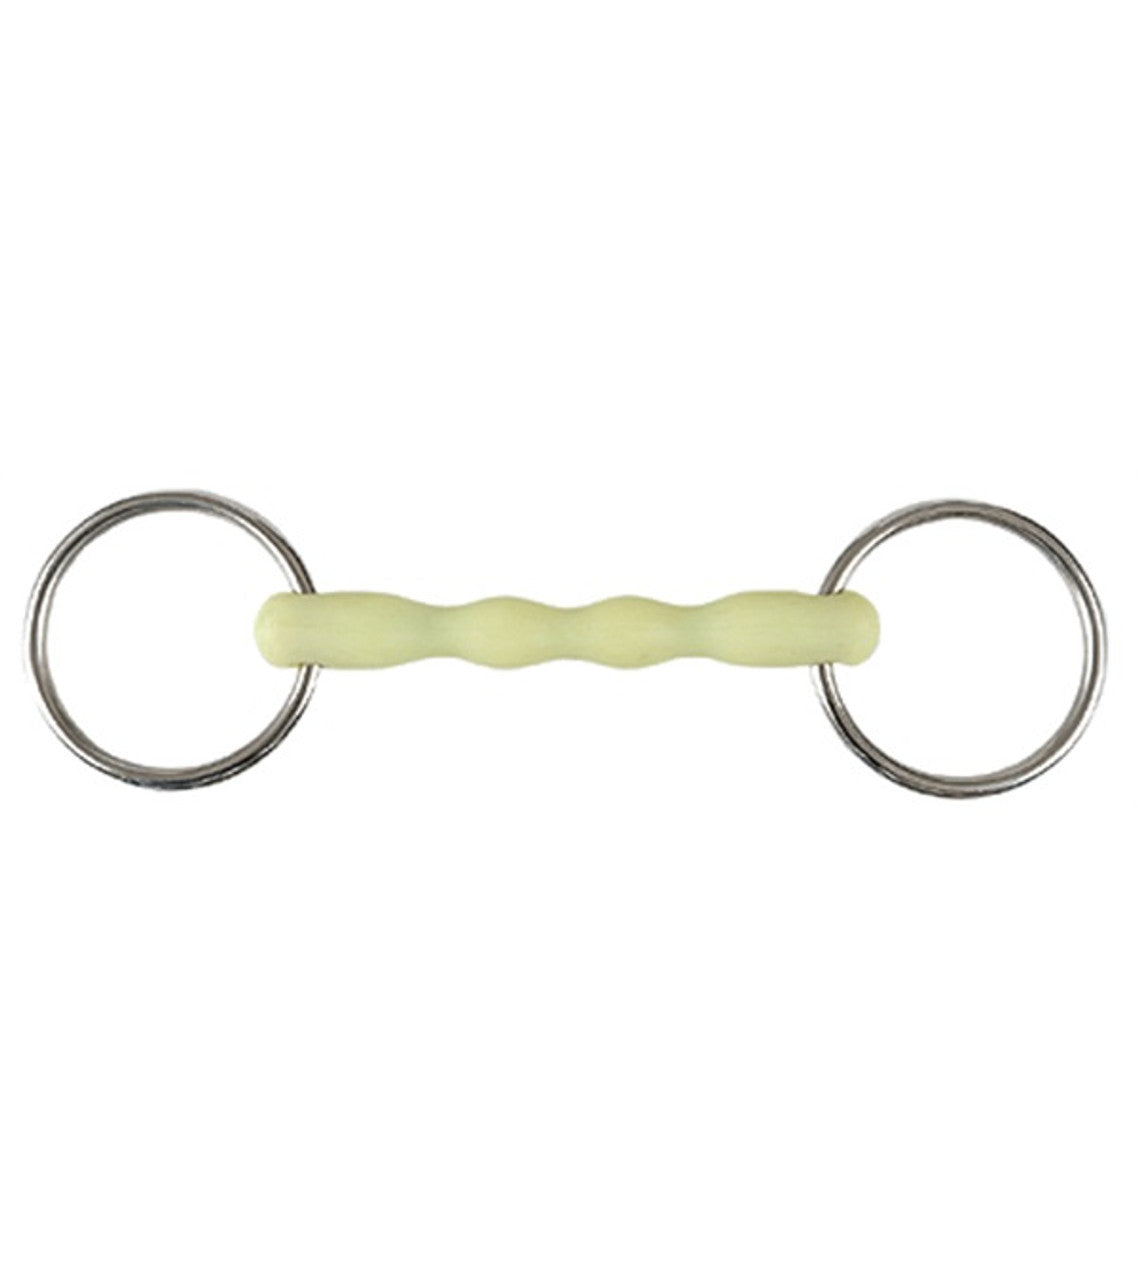 Apple Ring Bit with Flexible Shaped Mouth-TexanSaddles.com